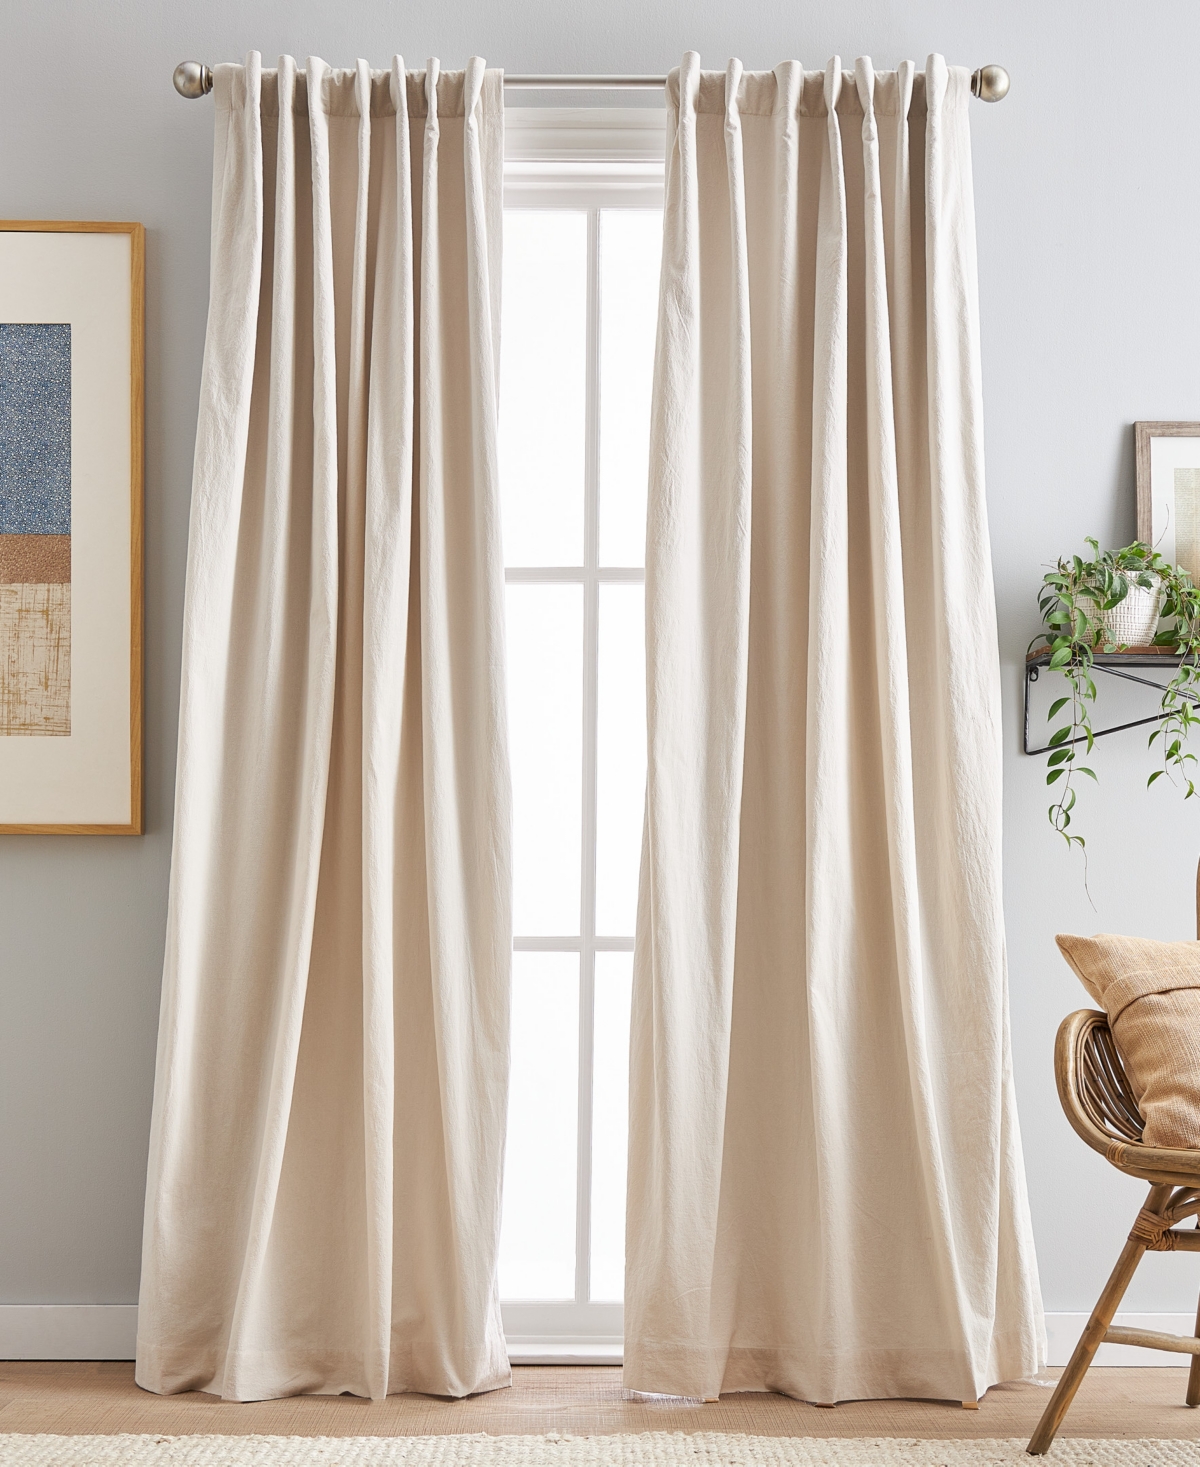 Peri Home Sanctuary Back Tab Lined 2-piece Curtain Panel Set, 50" X 84" In Linen